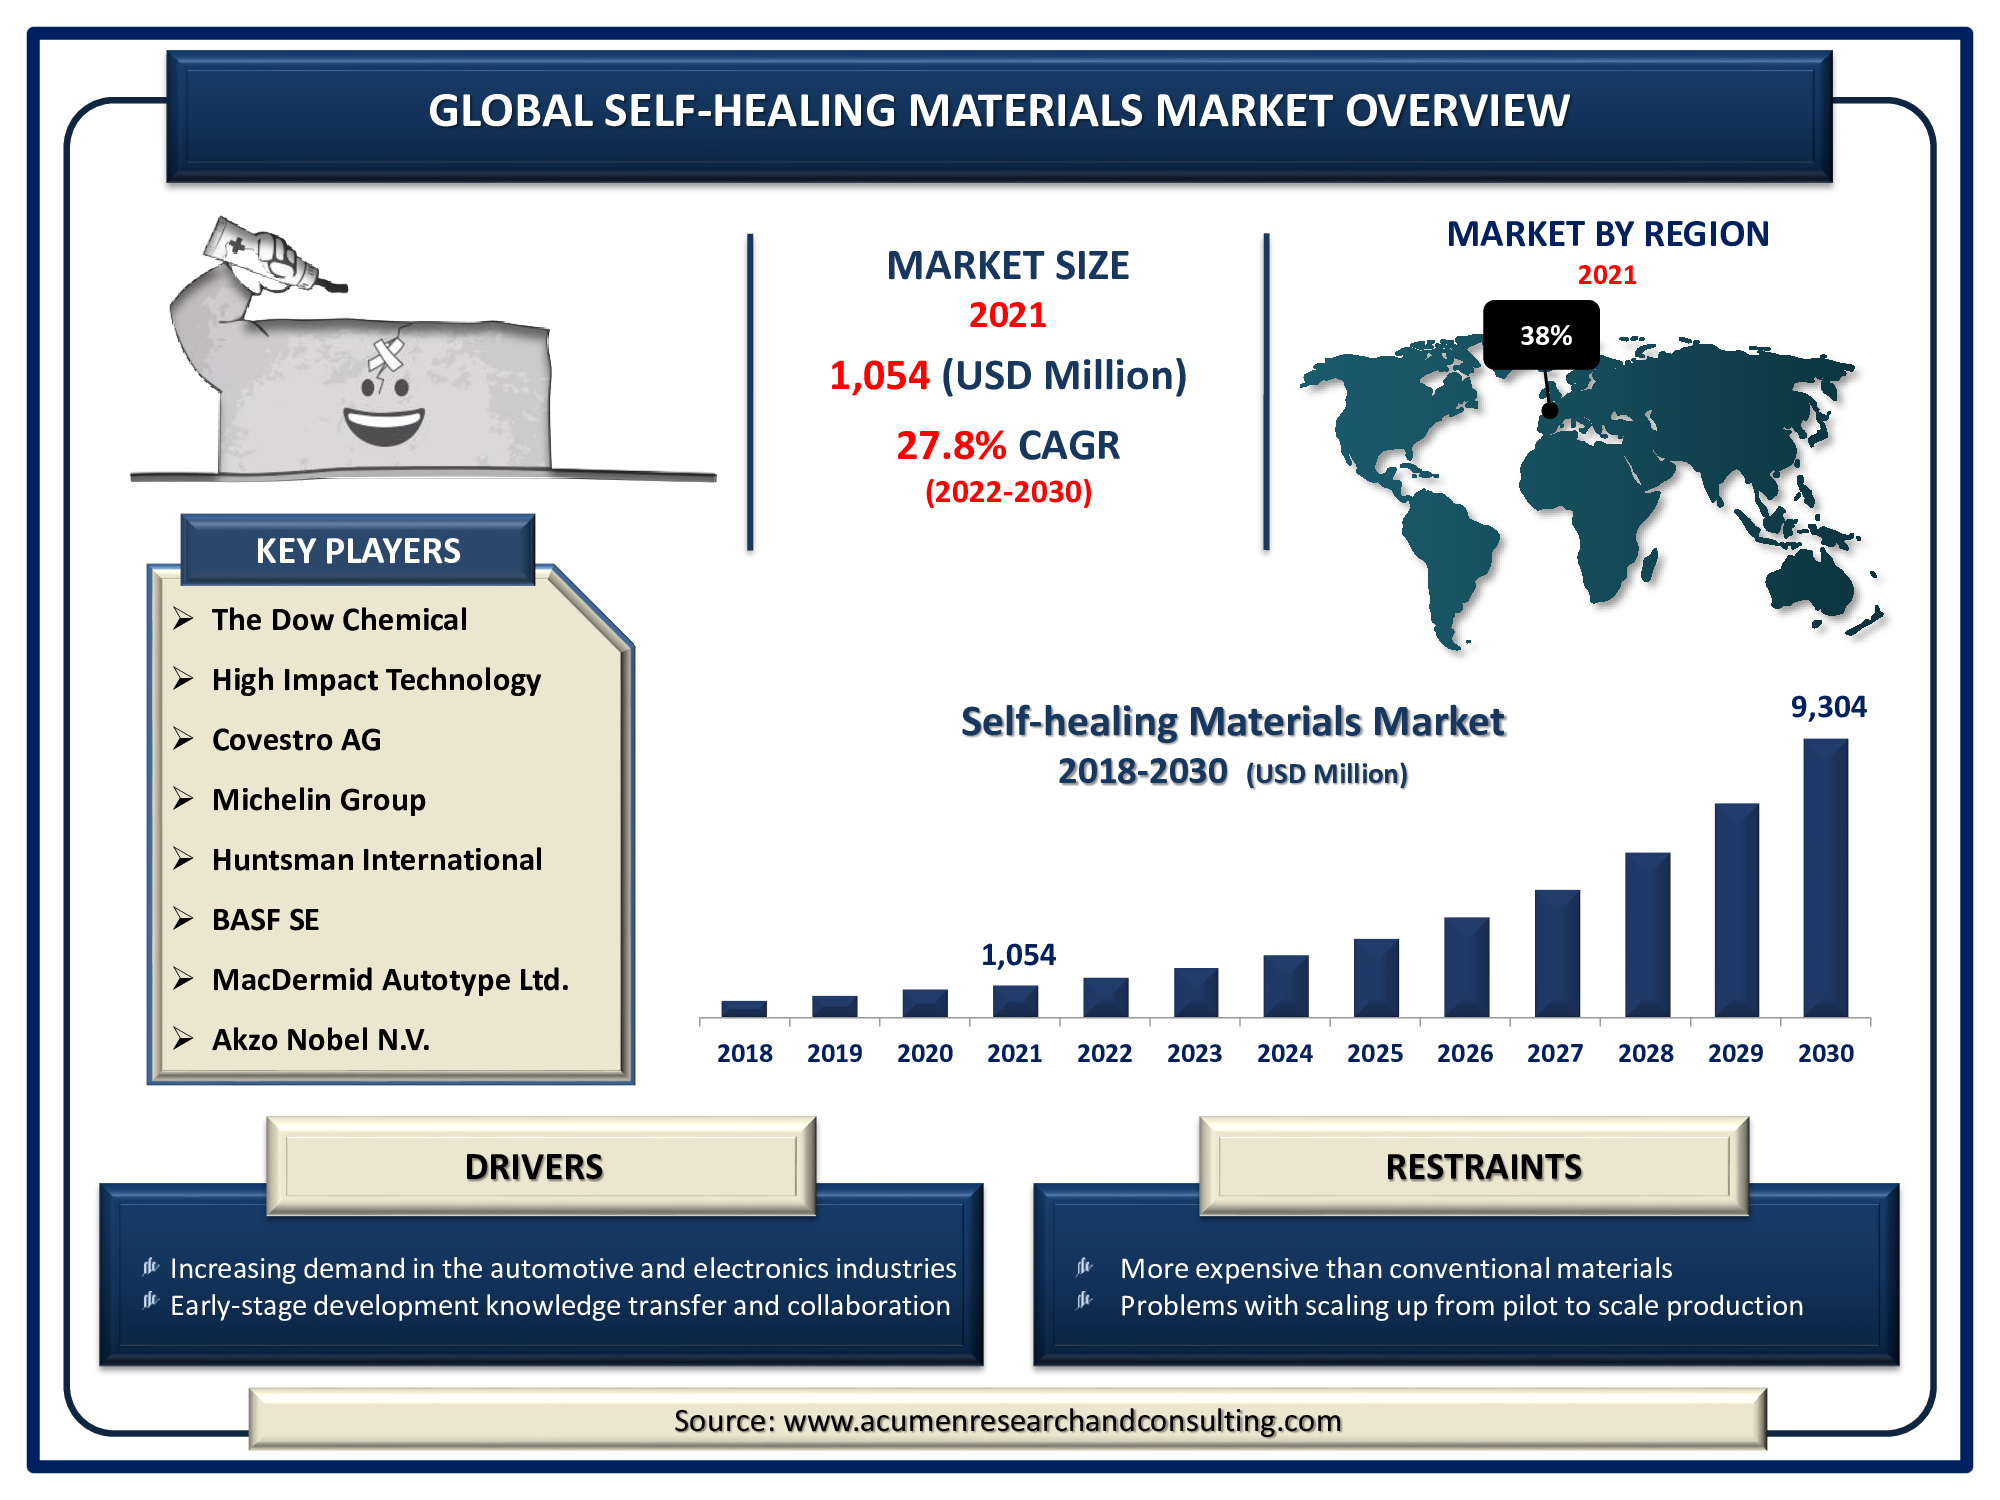 Self-healing Materials Market Size accounted for USD 1,054 Million in 2021 and is expected to reach USD 9,304 Million by 2030 with a considerable CAGR of 27.8% during the forecast period from 2022 to 2030.